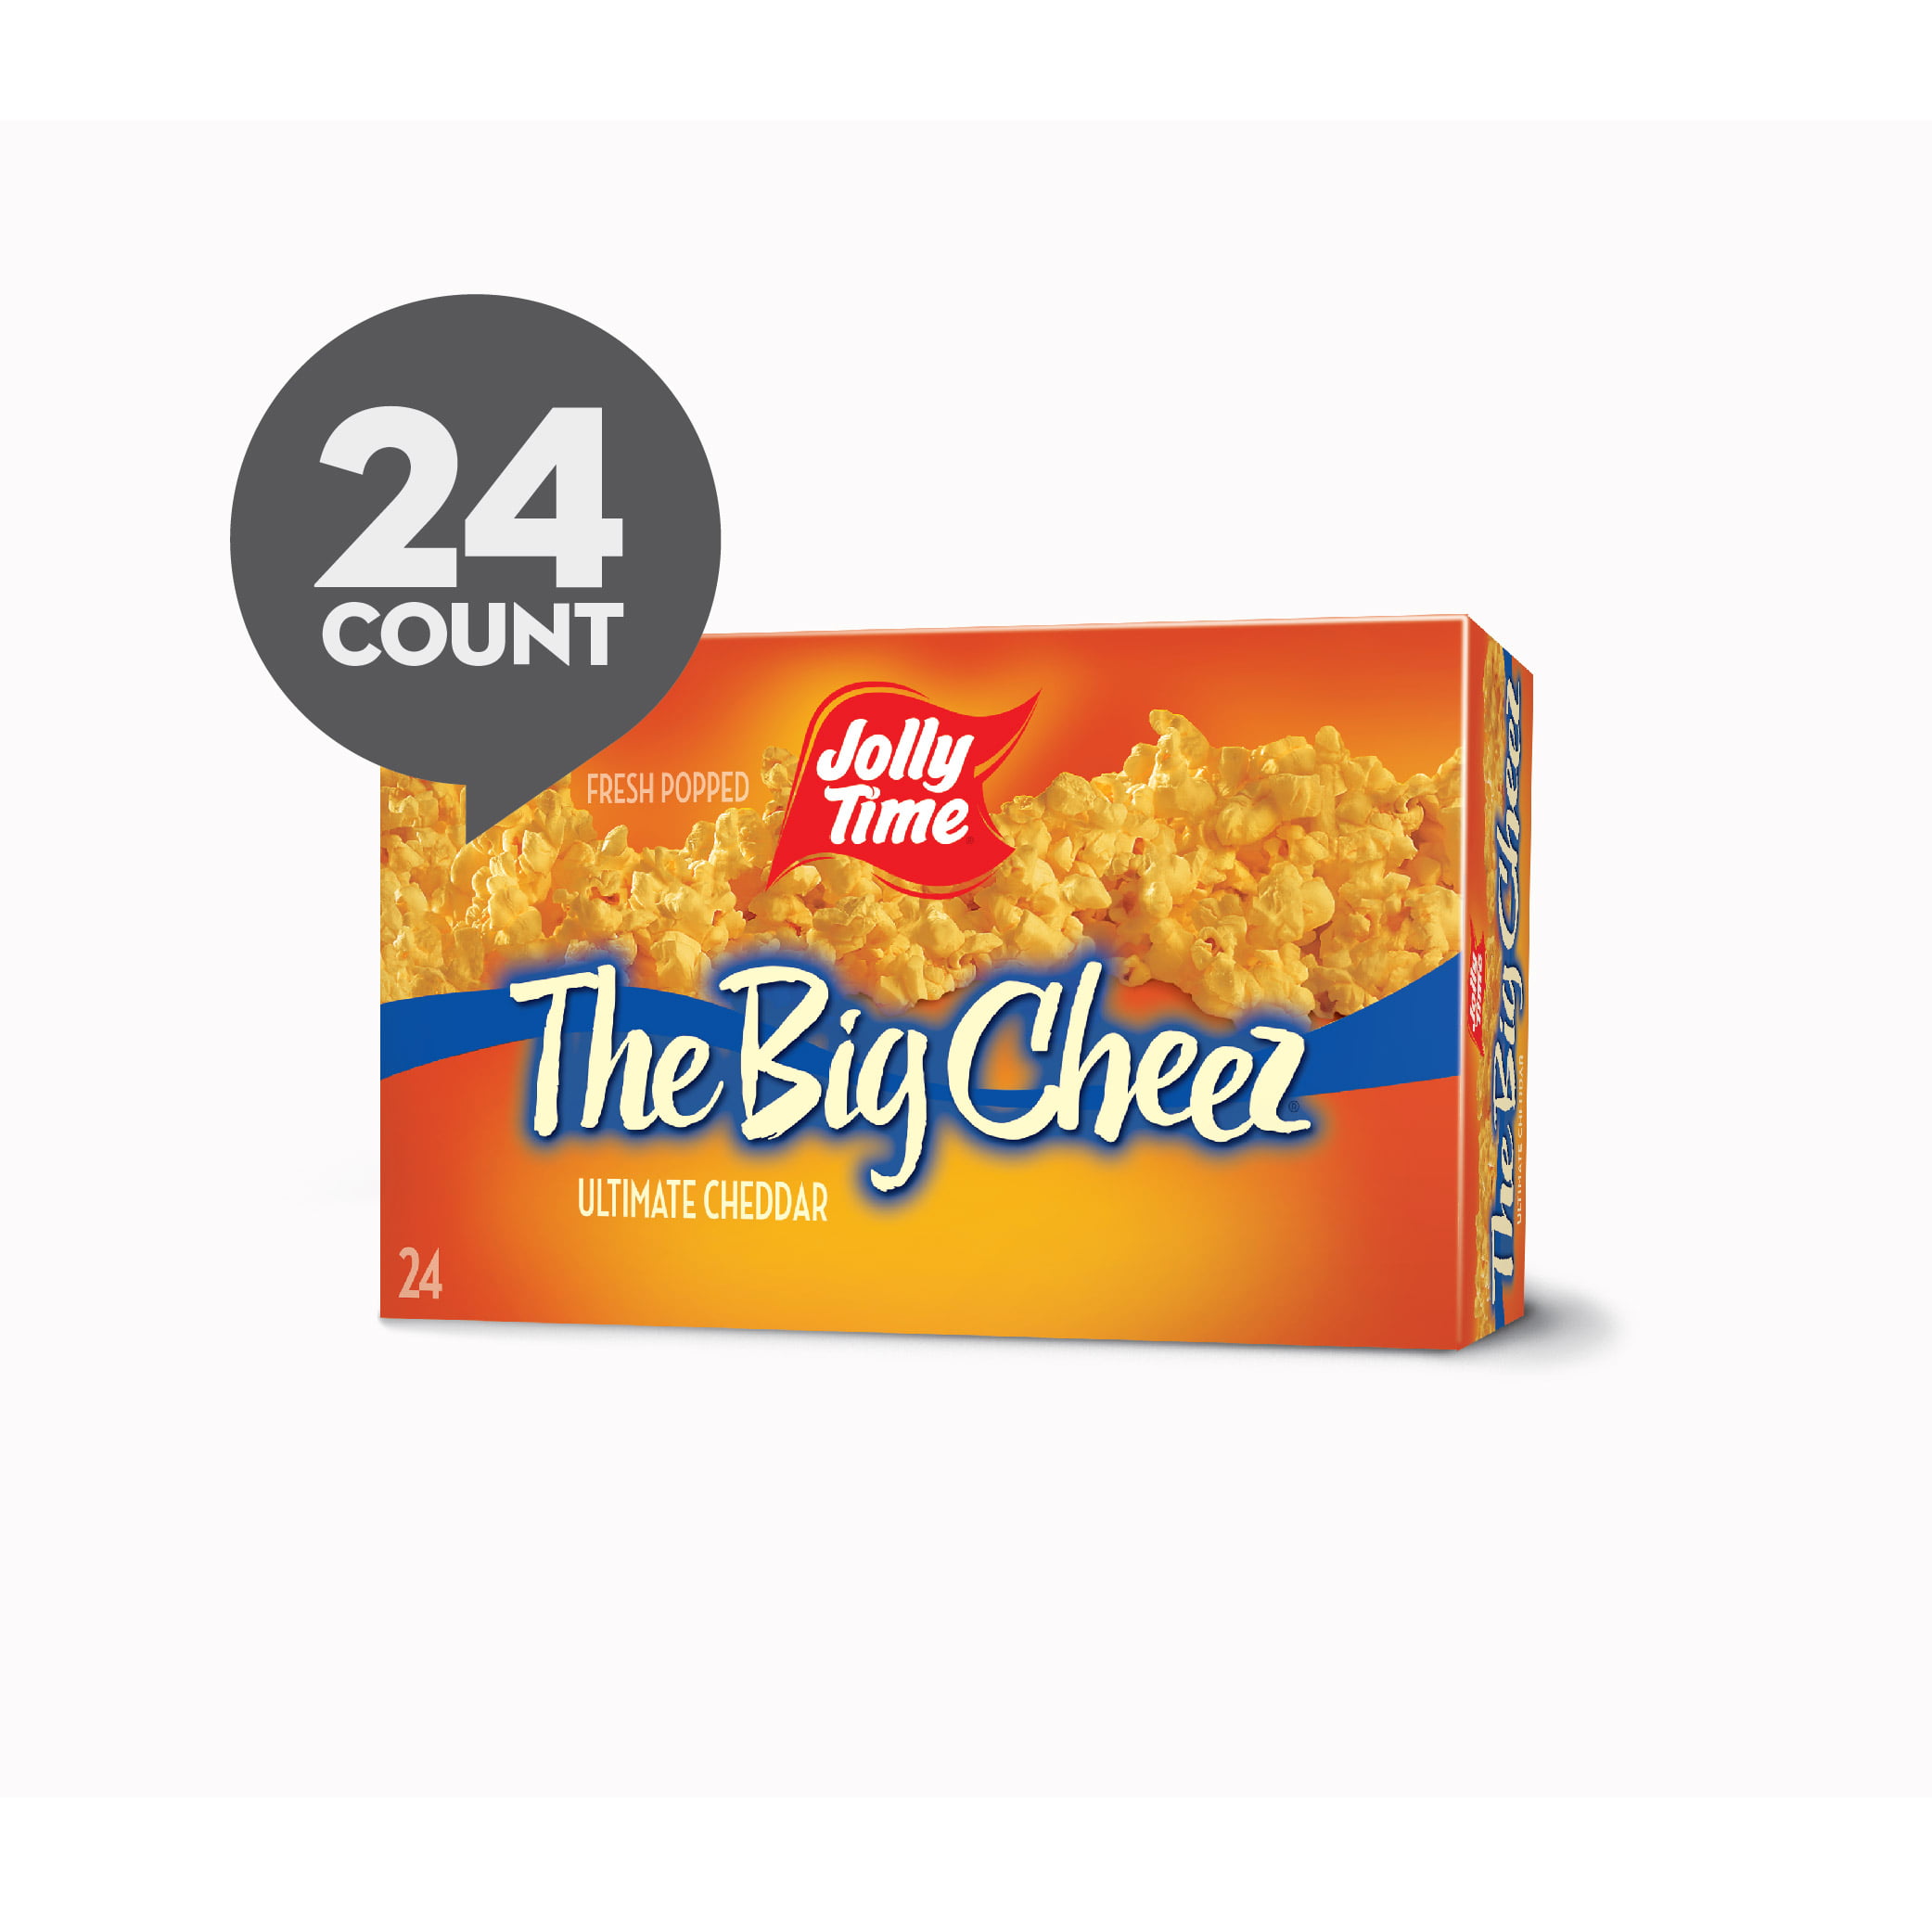 JOLLY TIME The Big Cheez Cheddar Cheese Microwave Popcorn, 24 Ct (3.5 oz. Bags)